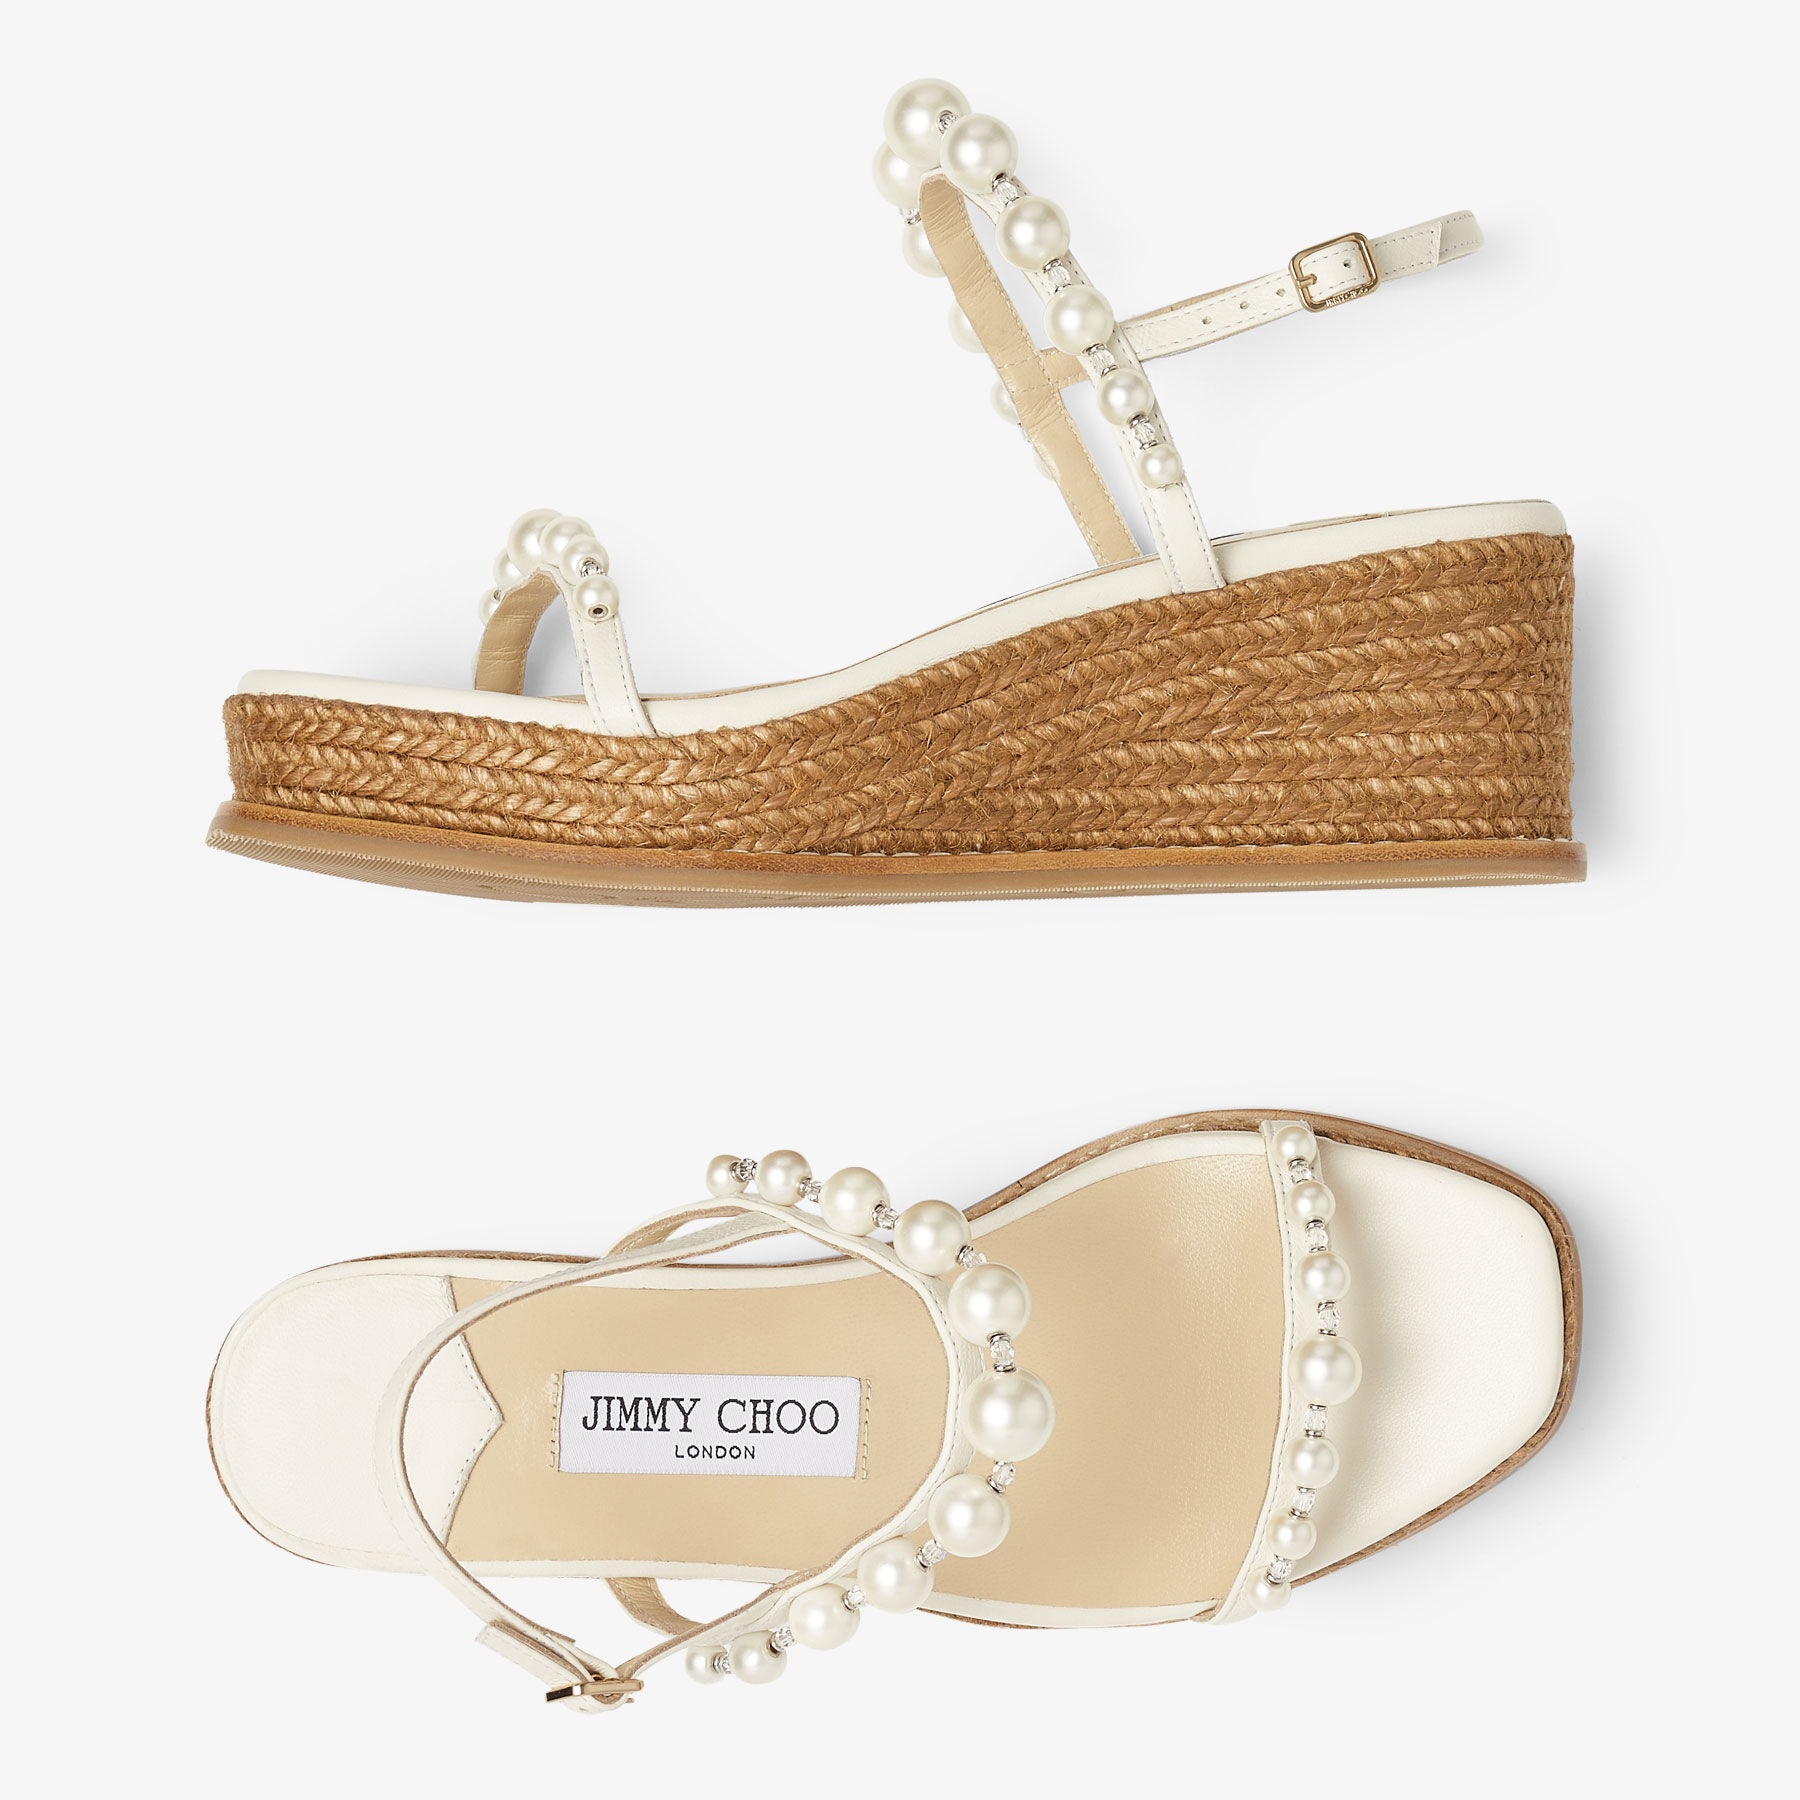 Amatuus 60
Latte Nappa Latte Wedge Sandals with Pearls - 5